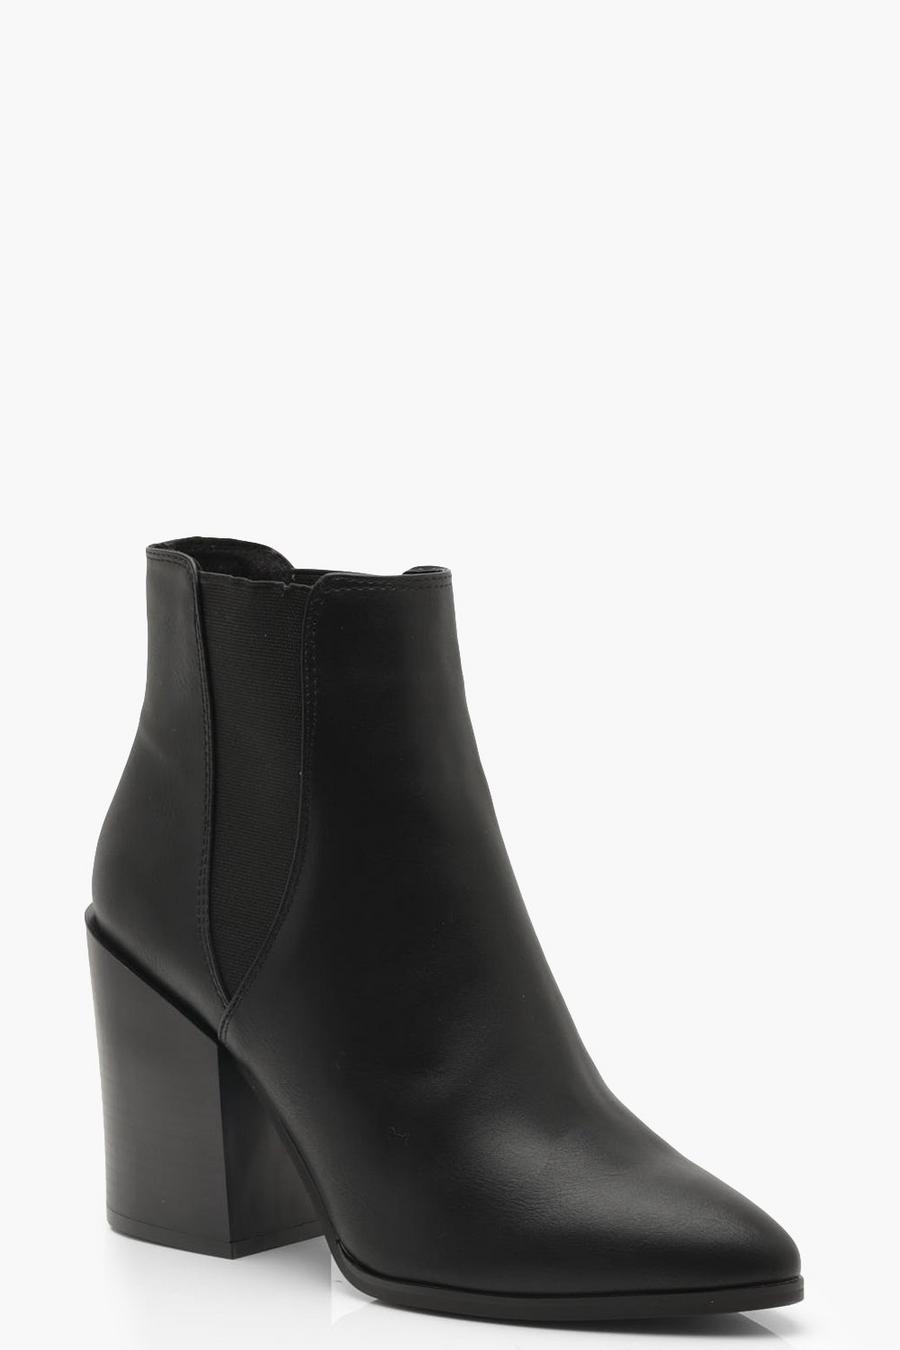 Black Pointed Chelsea Style Cowboy Boots image number 1